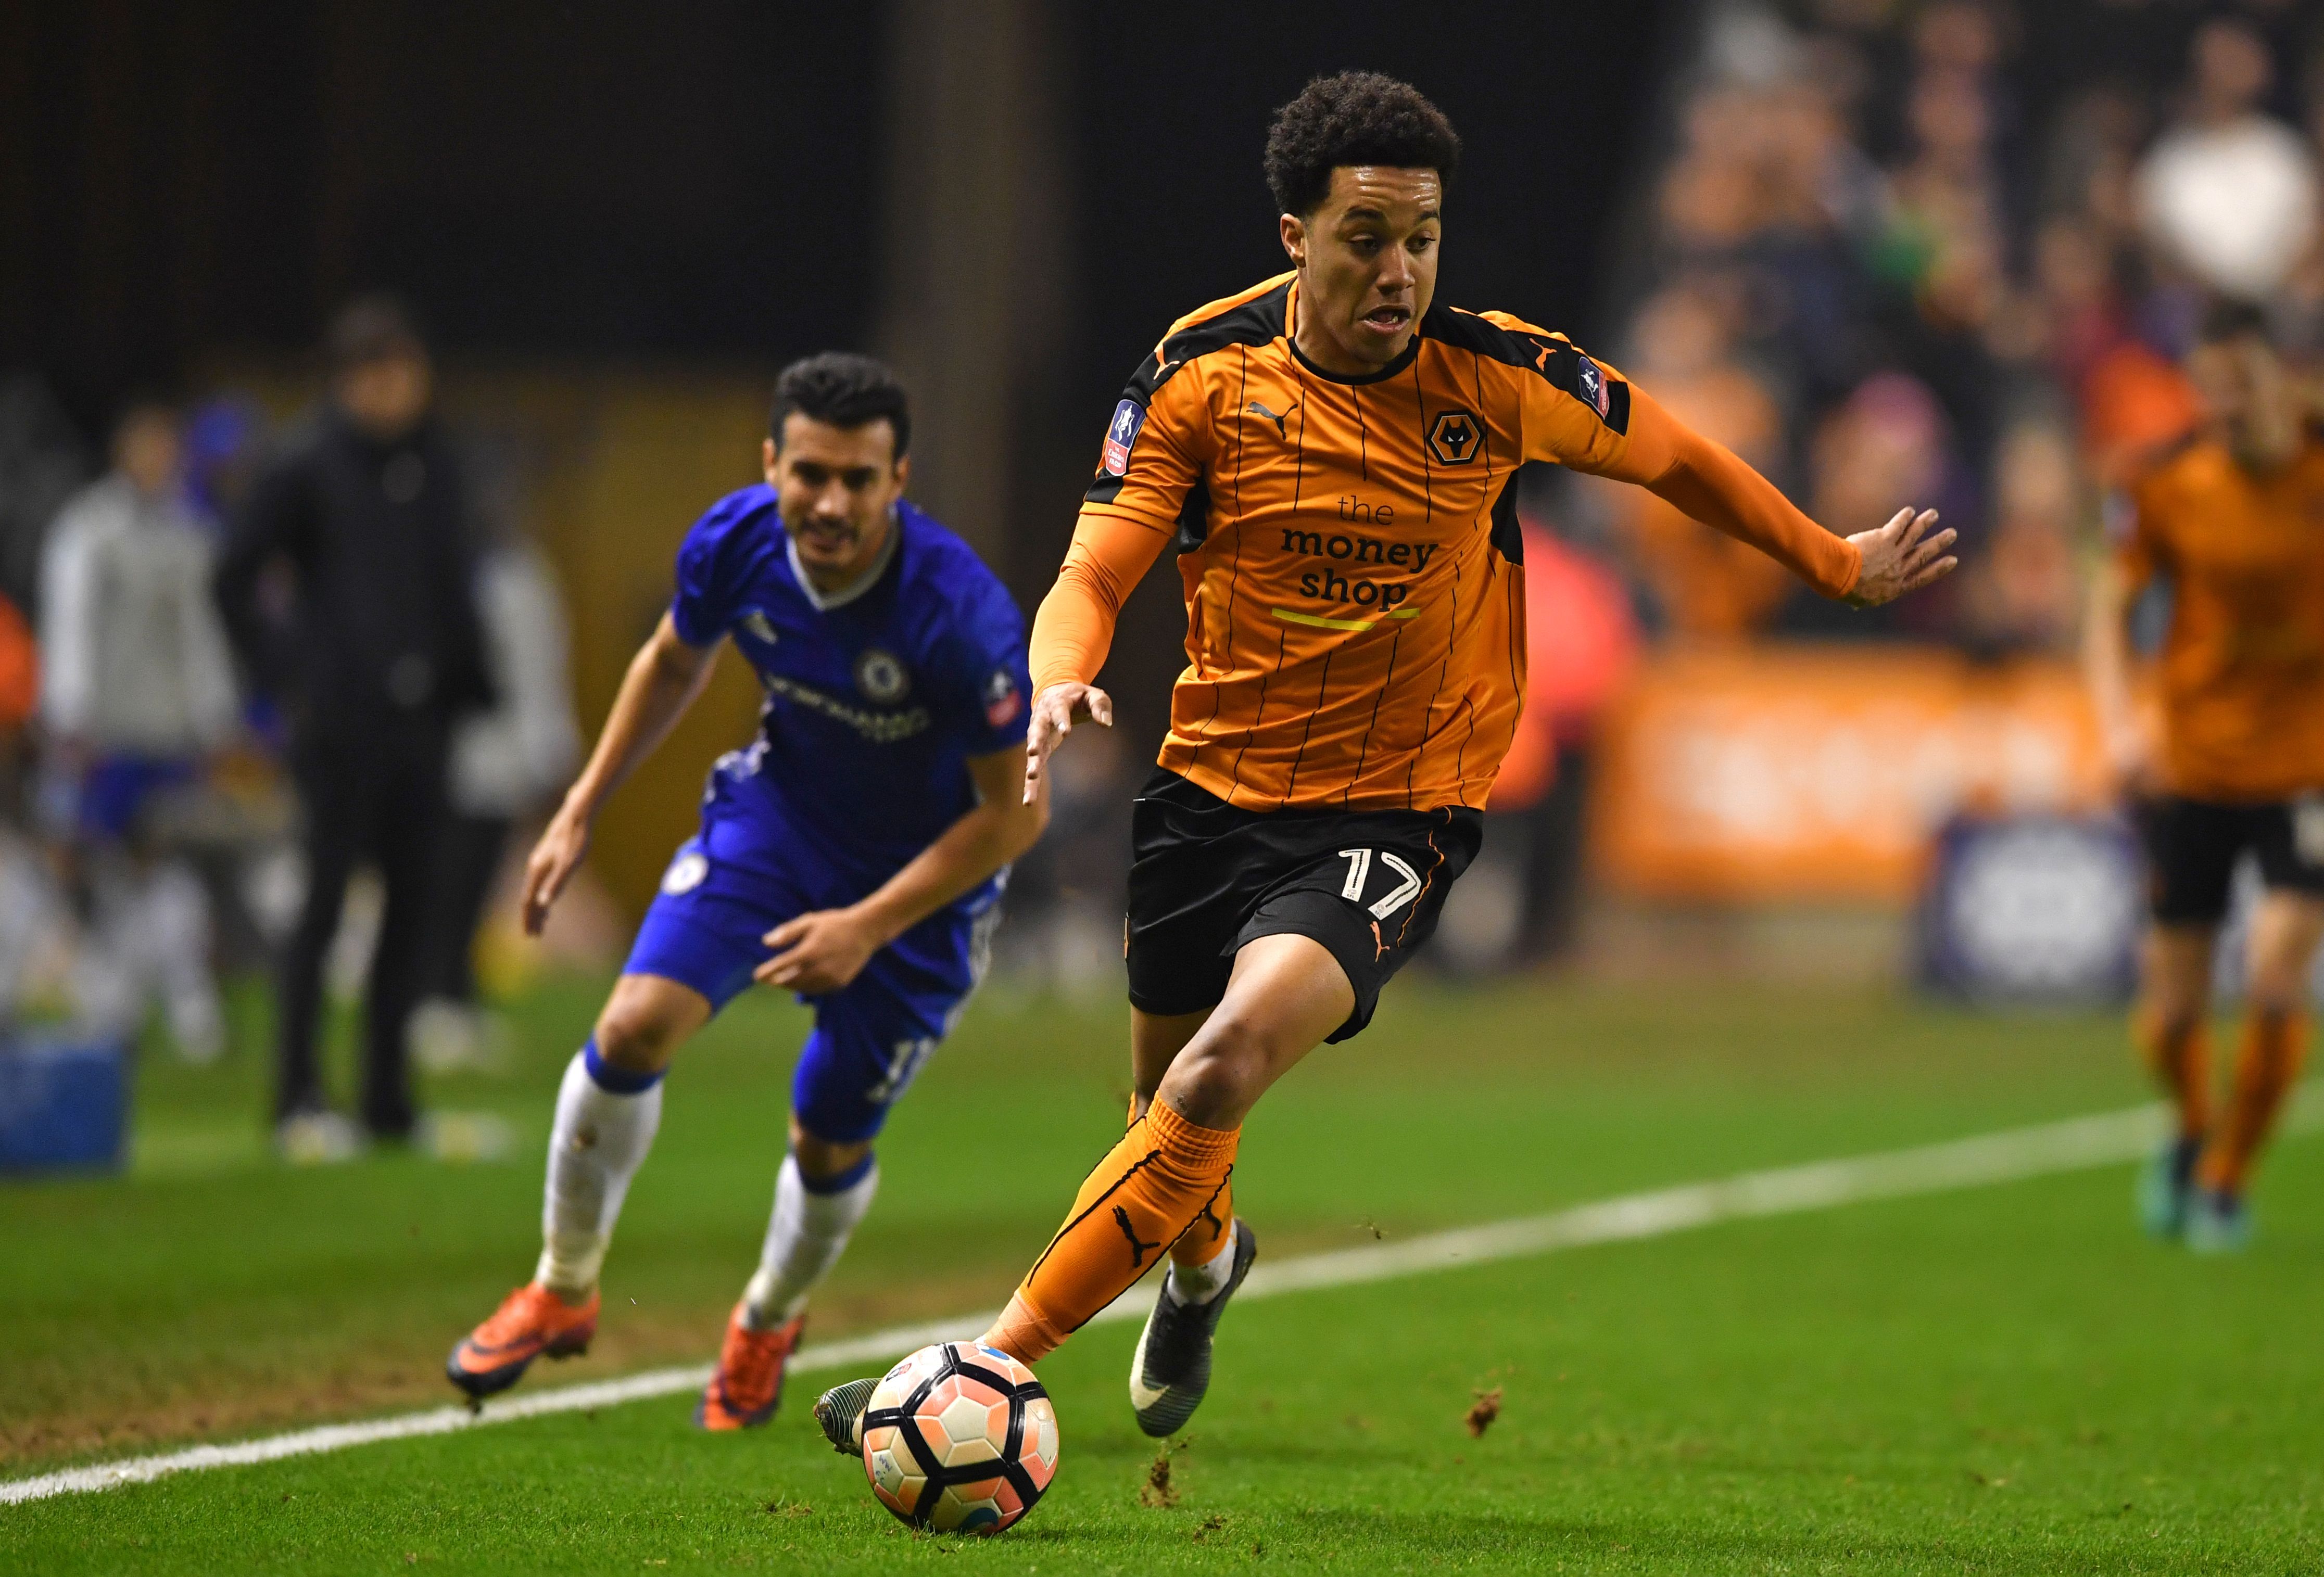 Wolverhampton Wanderers' Portuguese striker Helder Costa runs with the ball during the English FA Cup fifth round football match between Wolverhampton Wanderers and Chelsea at the Molineux stadium in Wolverhampton, central England on February 18, 2017. / AFP / Ben STANSALL / RESTRICTED TO EDITORIAL USE. No use with unauthorized audio, video, data, fixture lists, club/league logos or 'live' services. Online in-match use limited to 75 images, no video emulation. No use in betting, games or single club/league/player publications.  /         (Photo credit should read BEN STANSALL/AFP/Getty Images)